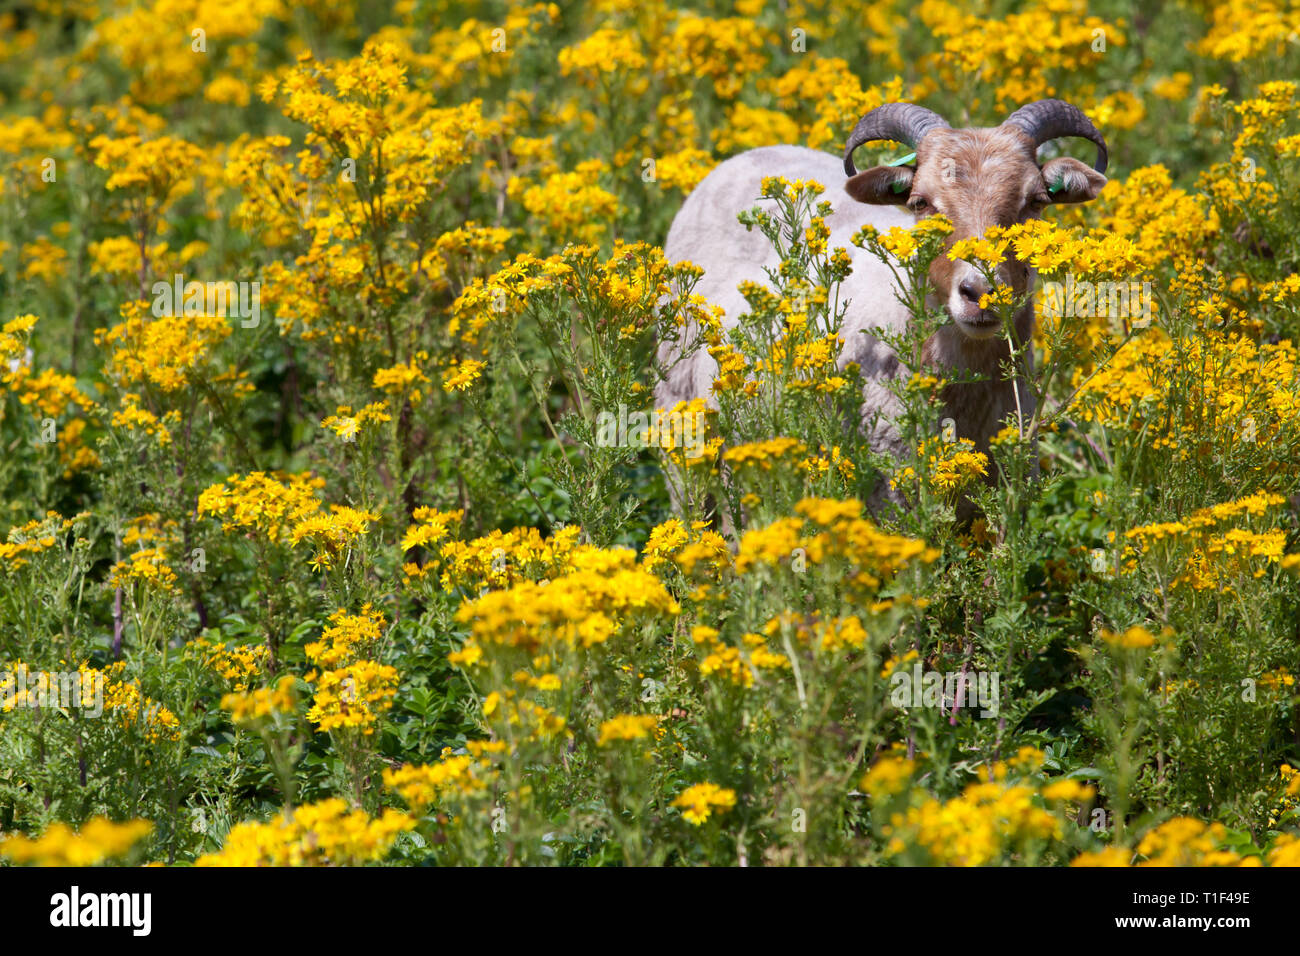 THE HAGUE - A goat in the dunes kept for grazing unwanted flowers and plants. Stock Photo